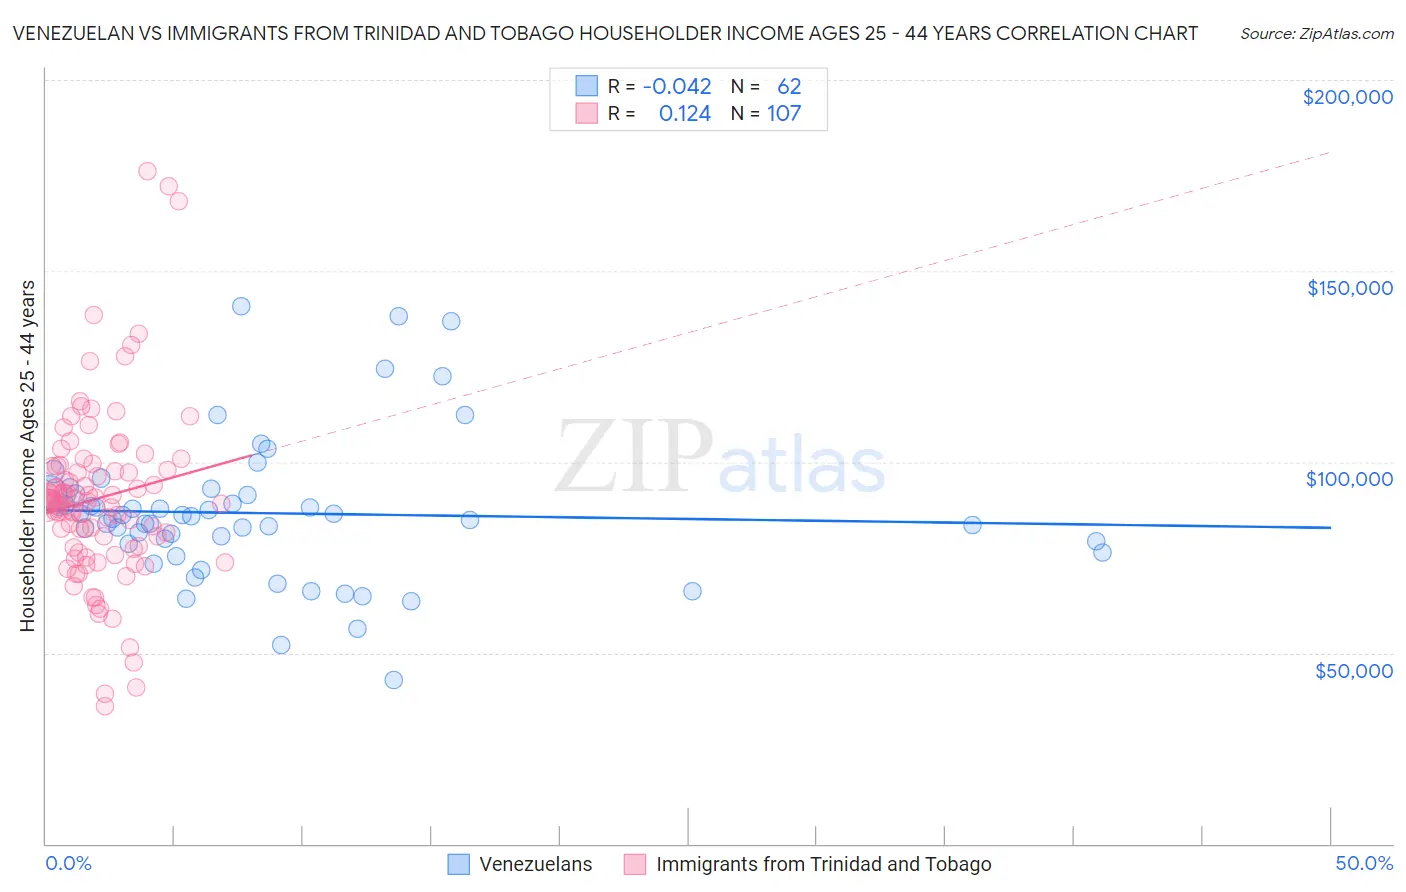 Venezuelan vs Immigrants from Trinidad and Tobago Householder Income Ages 25 - 44 years